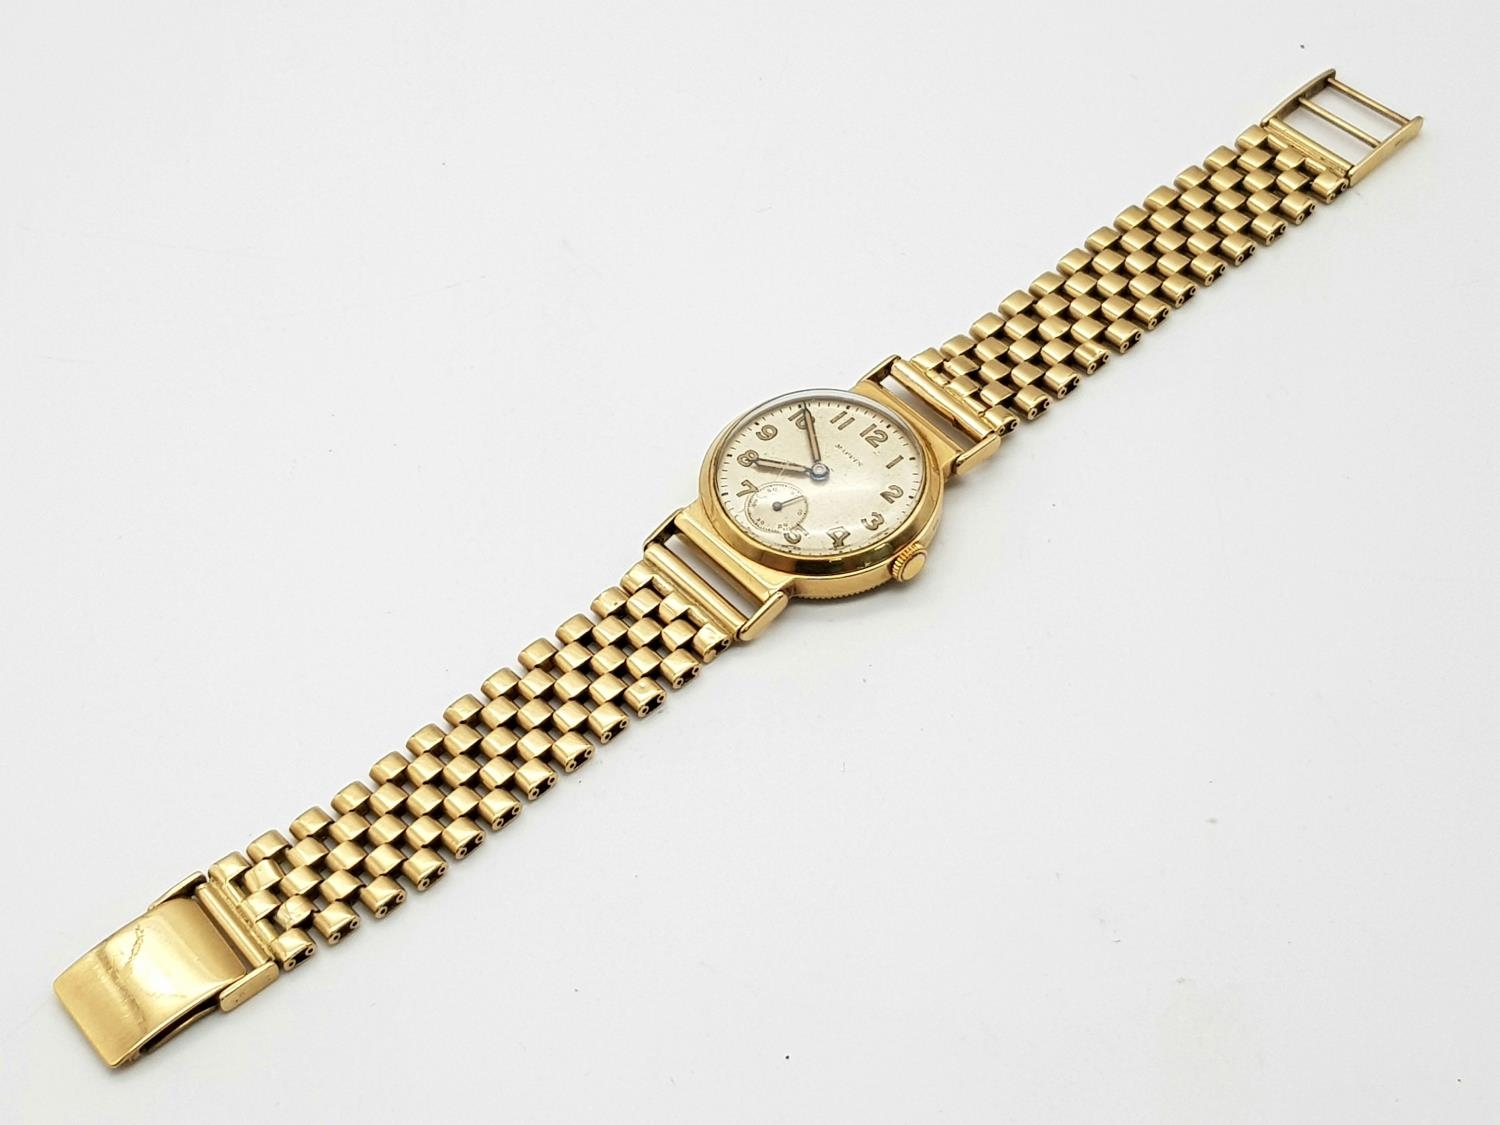 A Vintage (1950s) Mappin and Webb 9K Gold Watch. 9K gold bracelet and case - 28mm. Patinated dial - Image 7 of 9